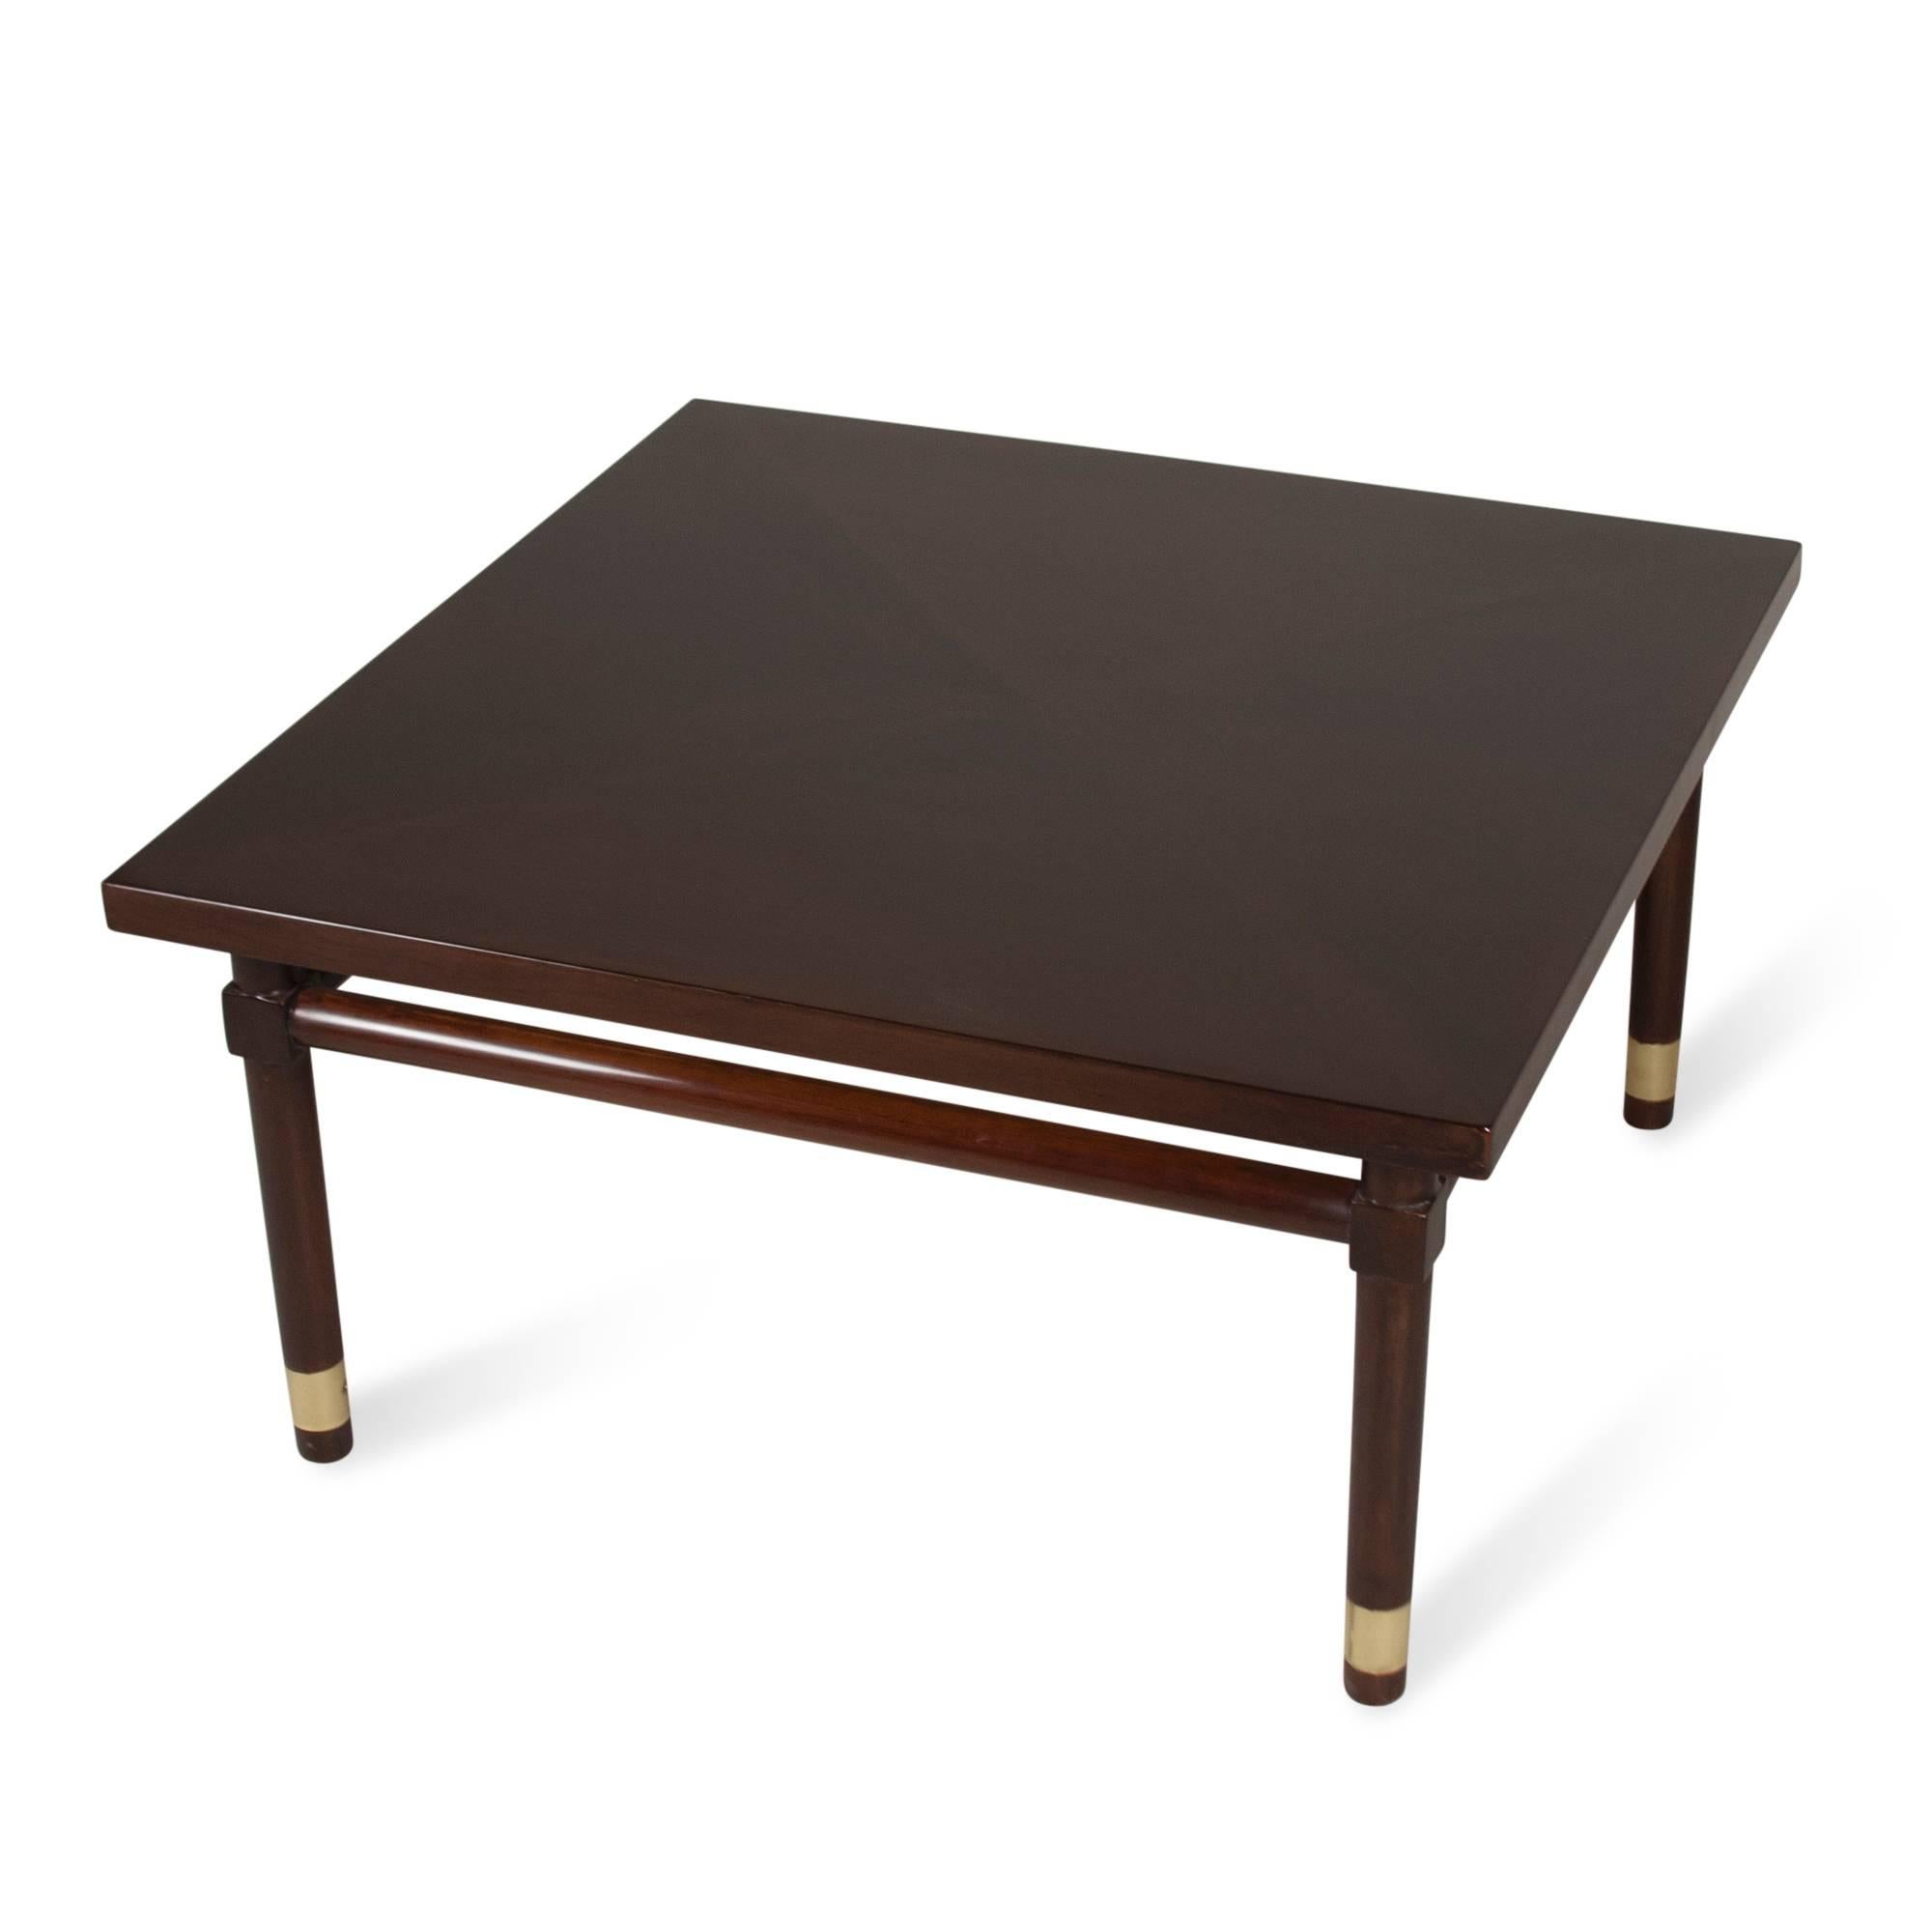 Solid mahogany square coffee table, rounded legs with brass band elements near the bottom, round stretchers between the legs, by Widdicomb, American, 1950s. Measures: 31 in square, height 16 1/2 in. (sats)